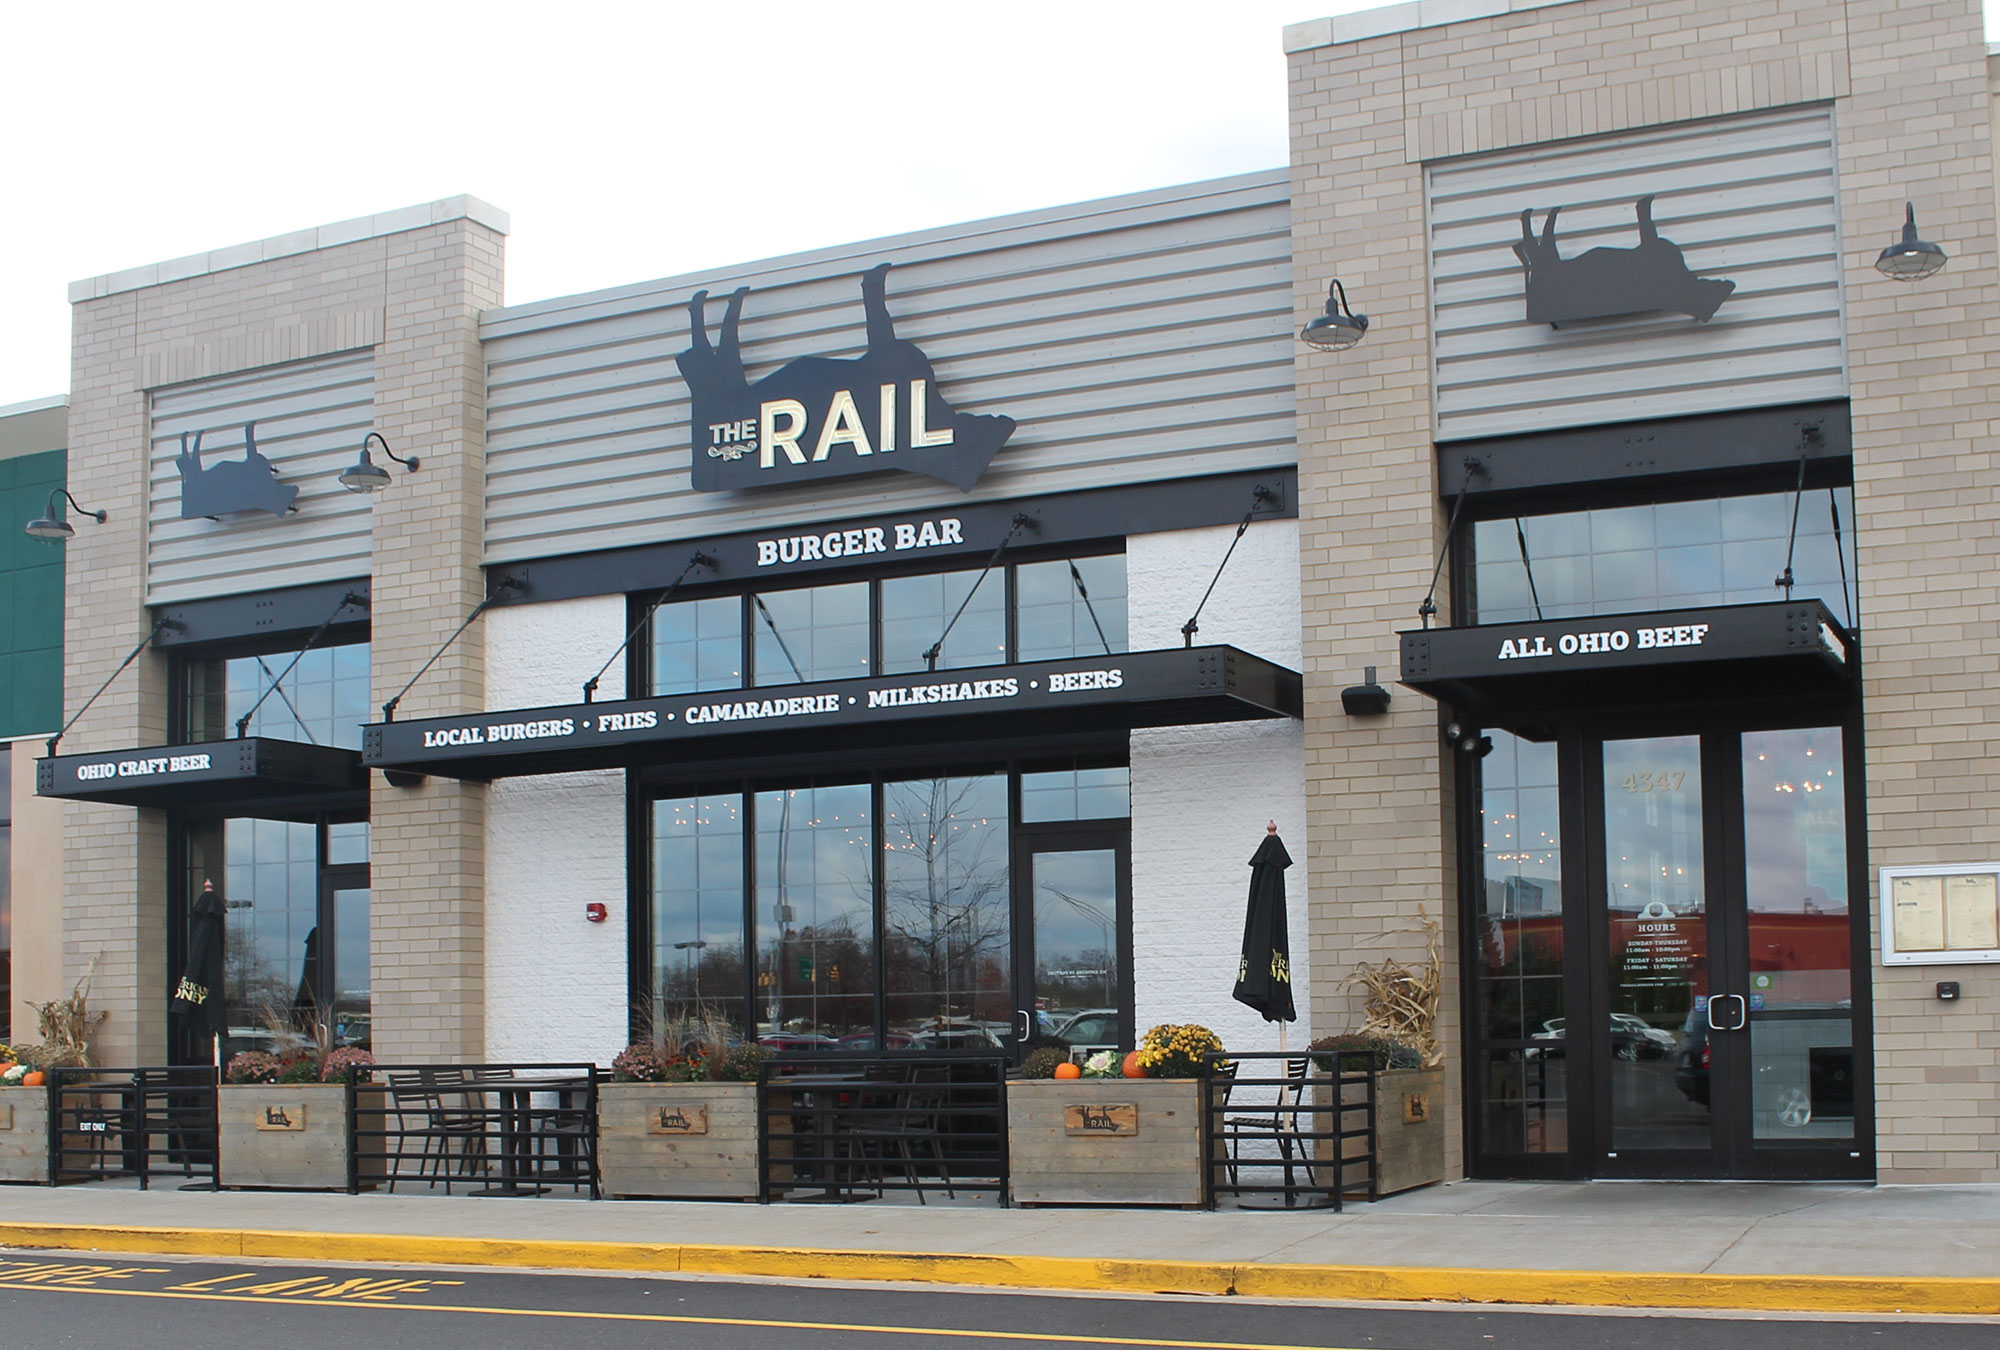 Best Contractor for Restaurant The Rail Front - Canton, Ohio by Fred Olivieri